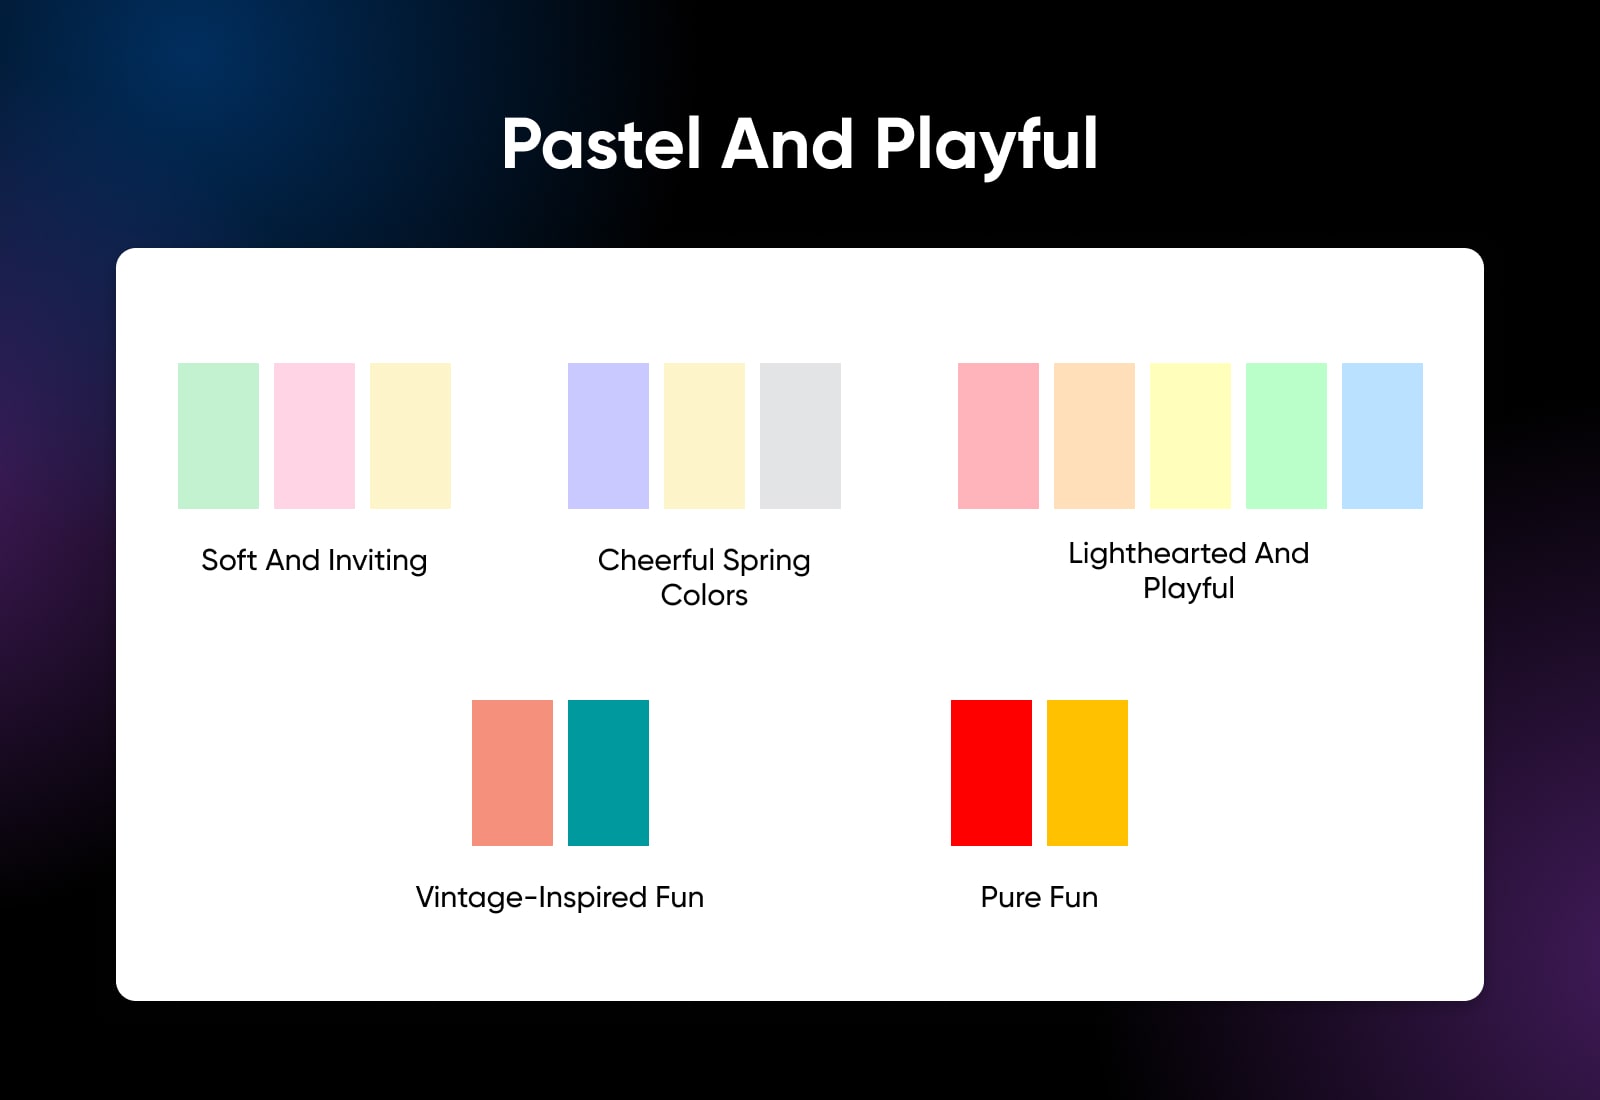 pastel and playful color schedule showing muted pastels like the lilac/yellow/gray option